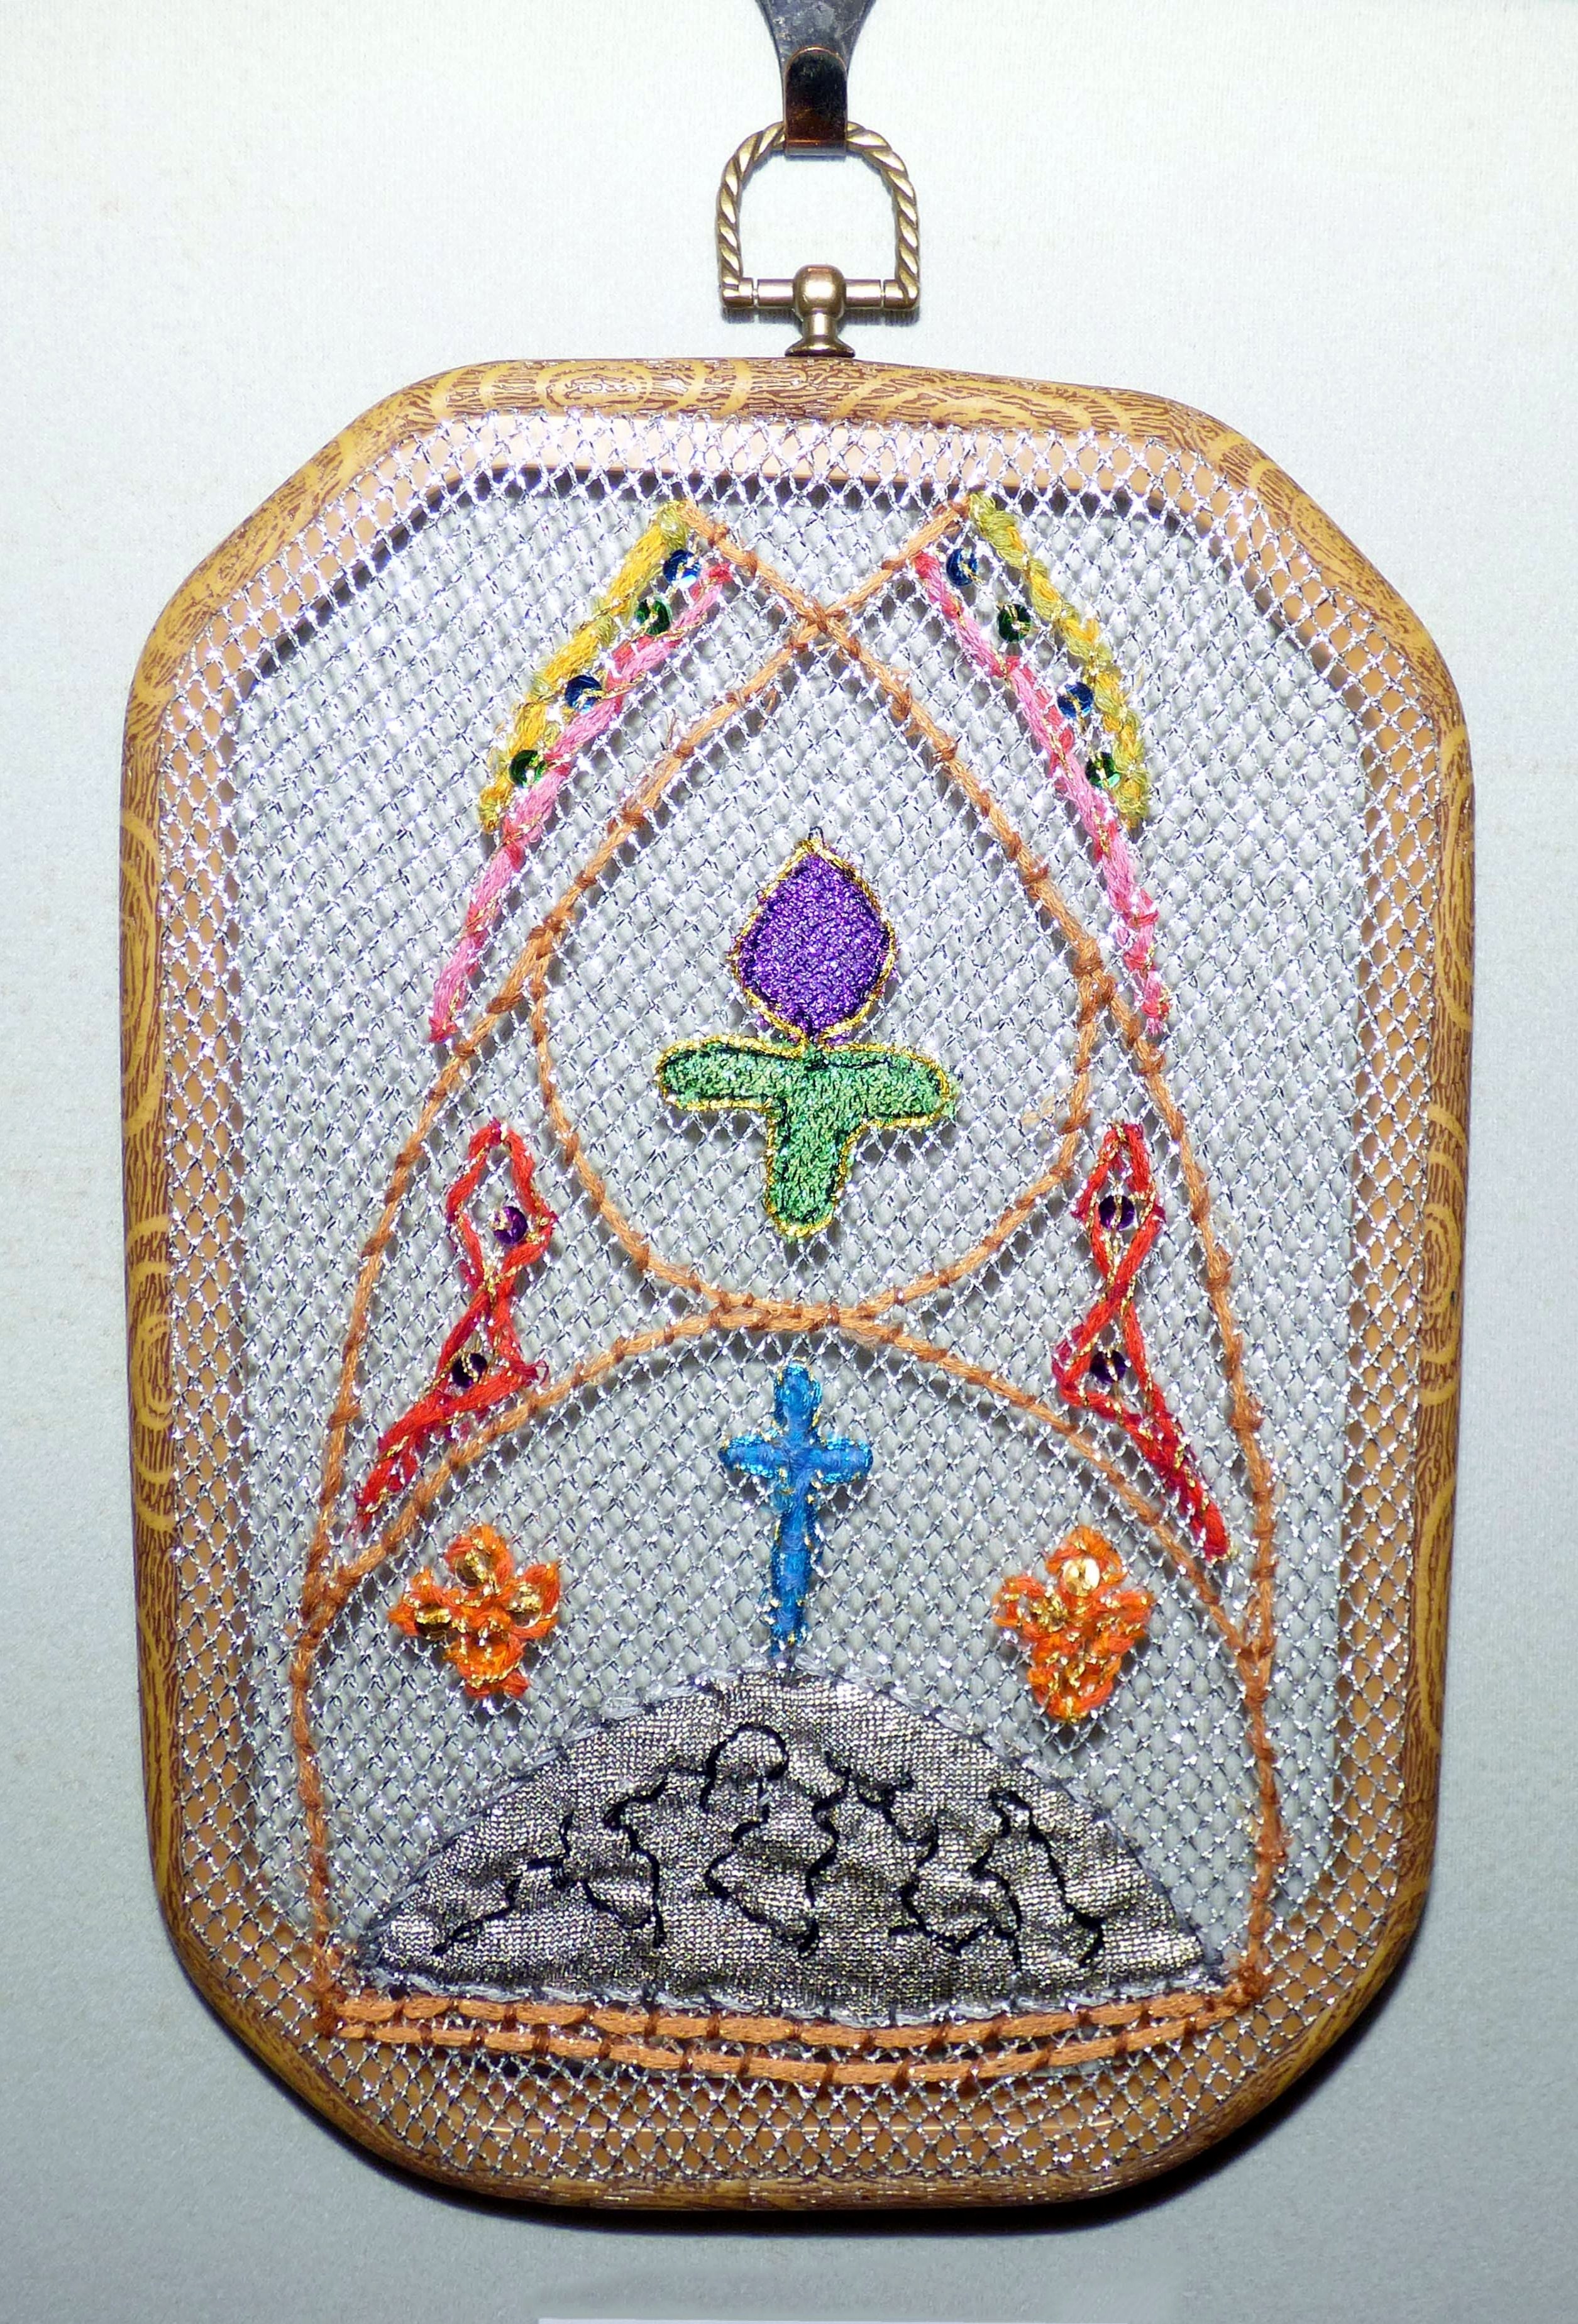 MINIATURE STAINED GLASS WINDOW by Eileen Sampson, mixed media ,wool and metallic threads with appliqué on silver mesh, Exhibition at All Hallows Church, September 2022